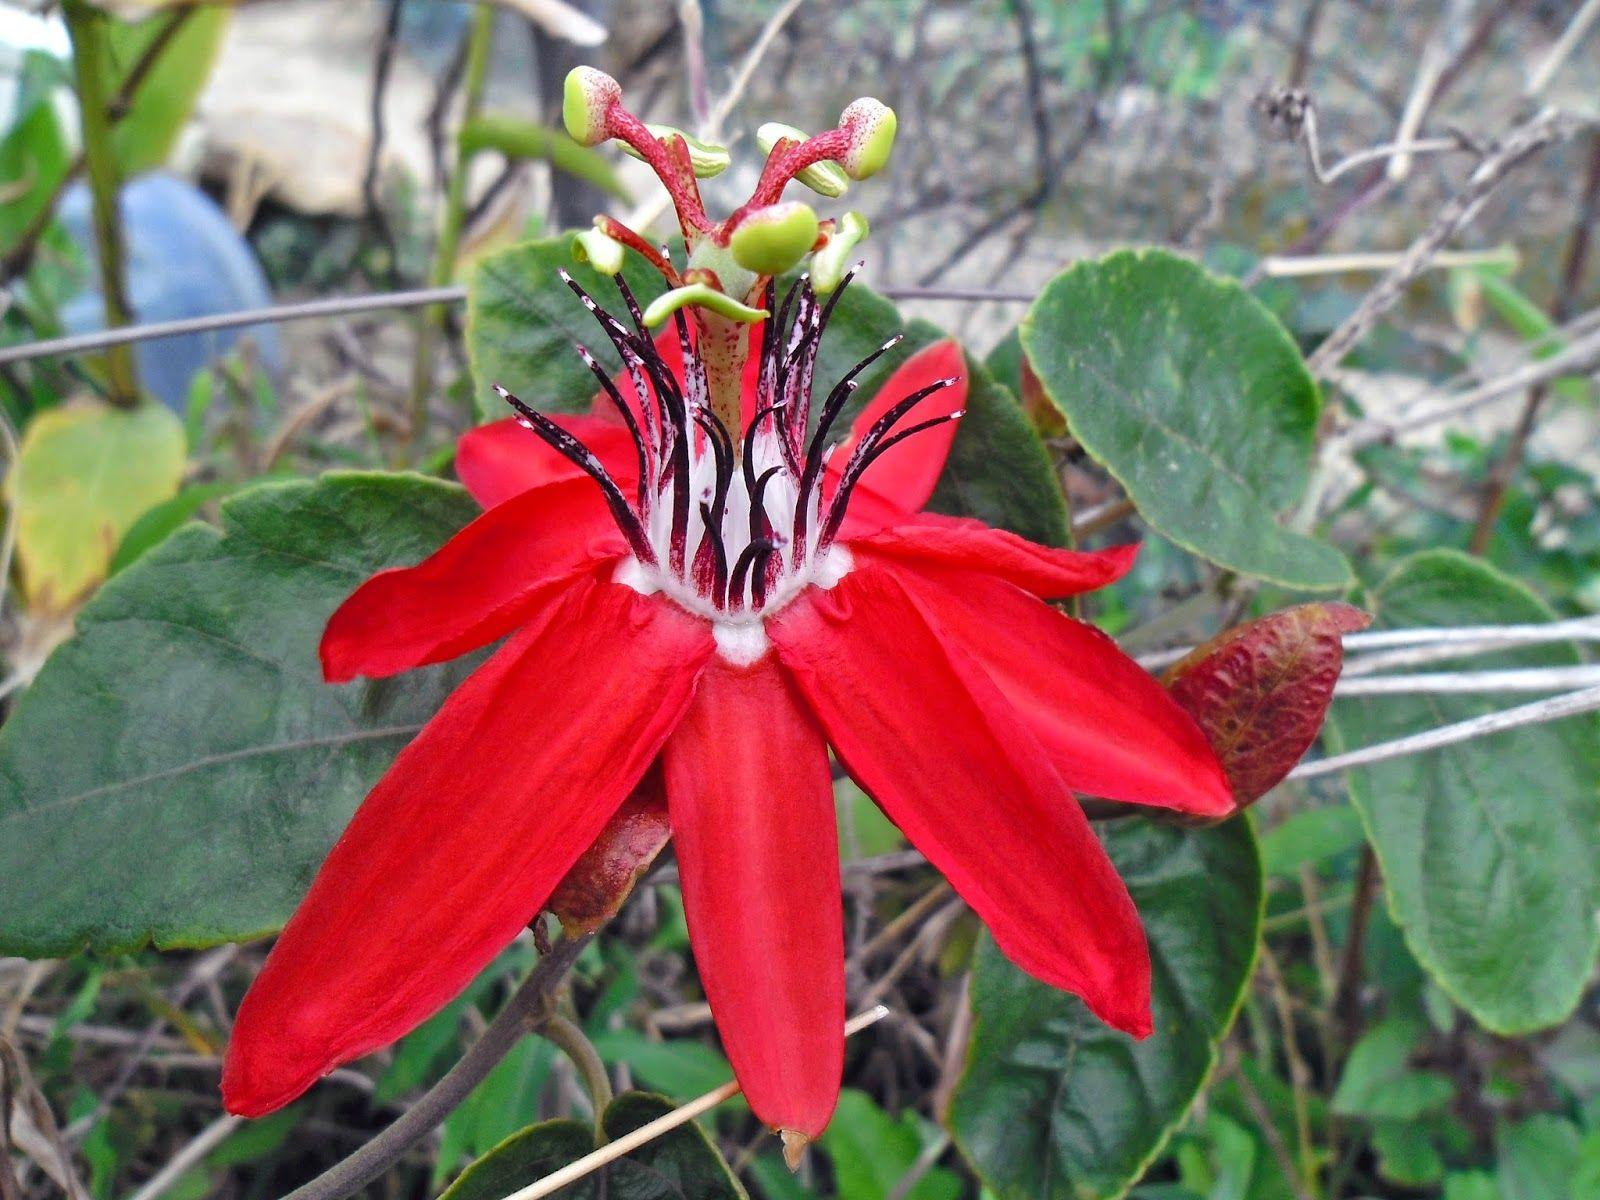 Passion Flower looking flower right here on Earth